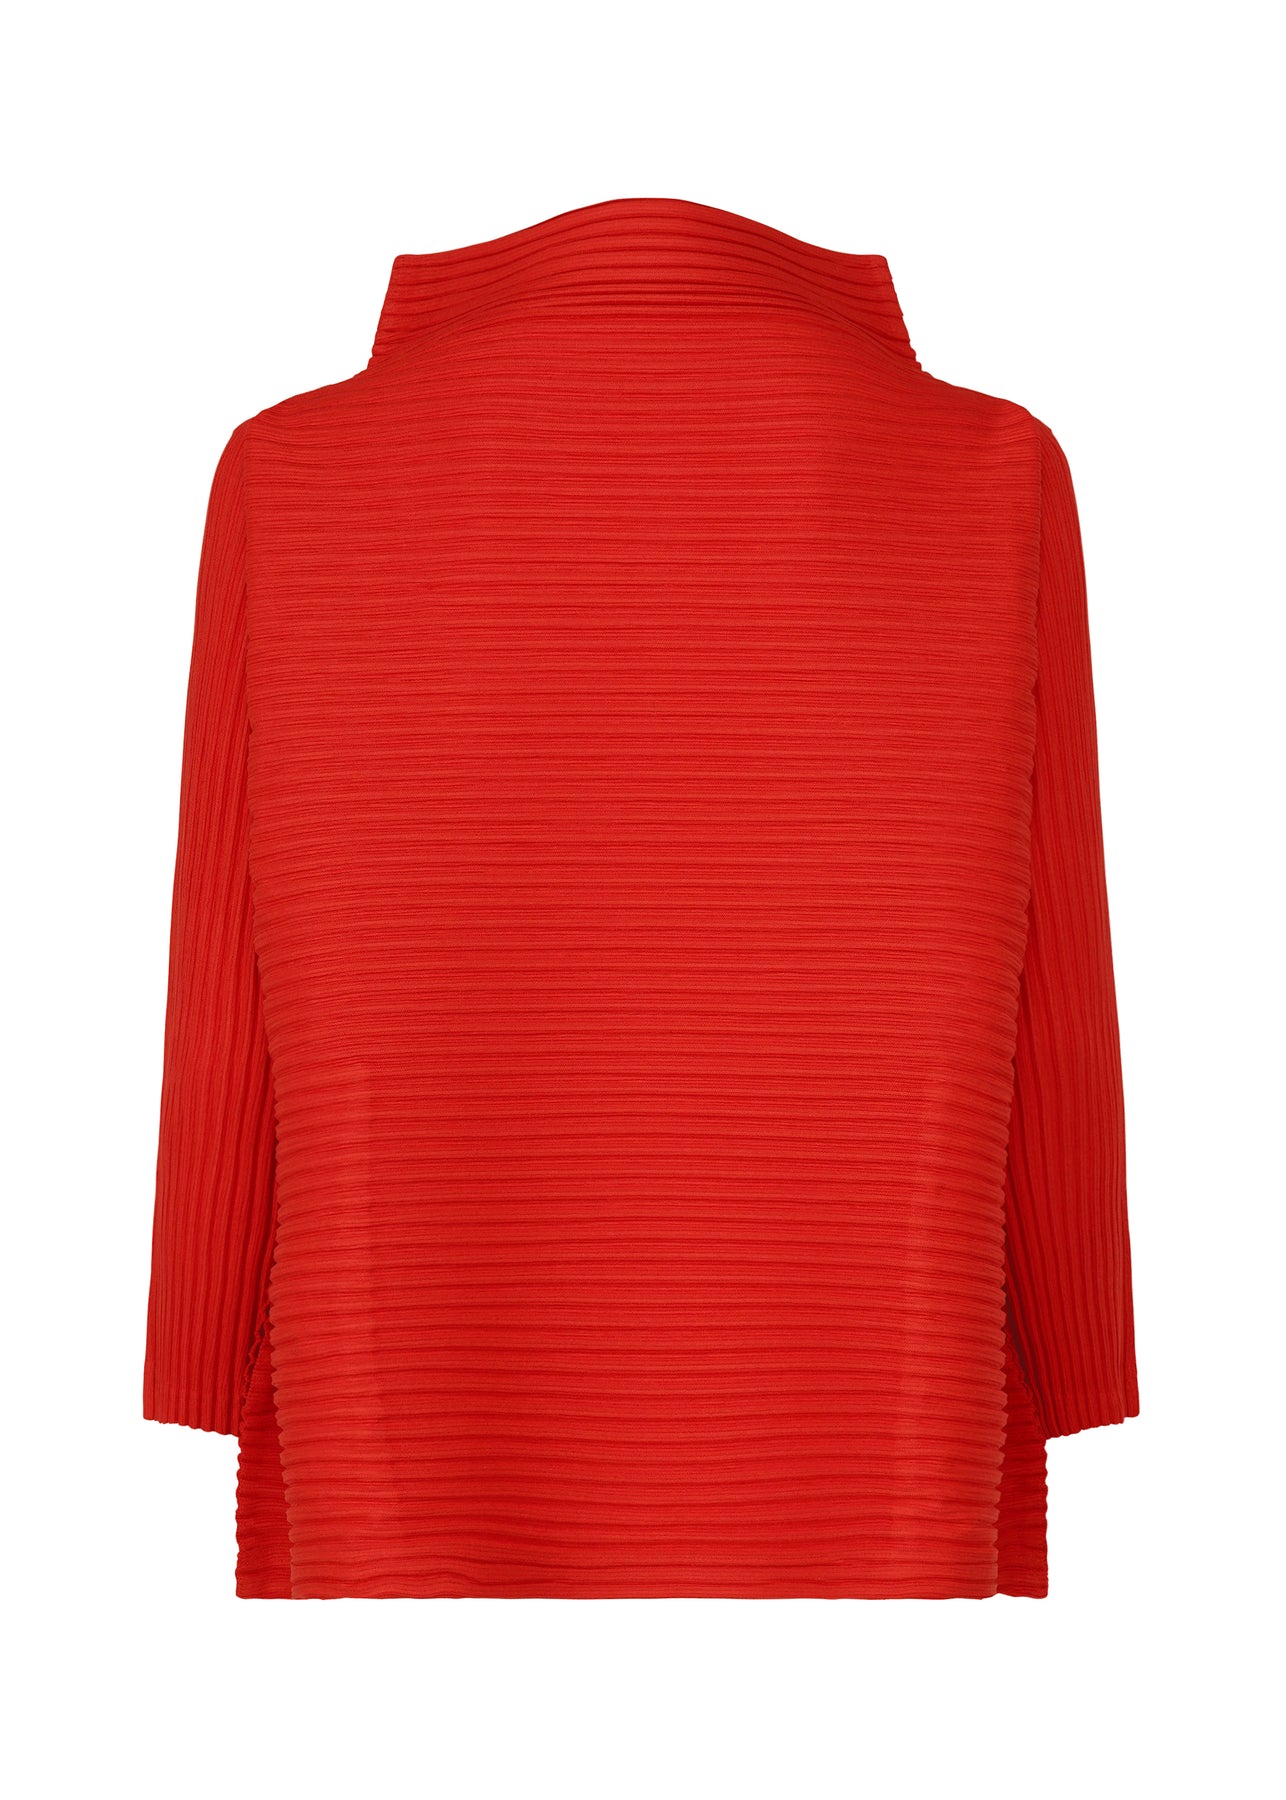 CORDUROY PLEATS TOP | The official ISSEY MIYAKE ONLINE STORE